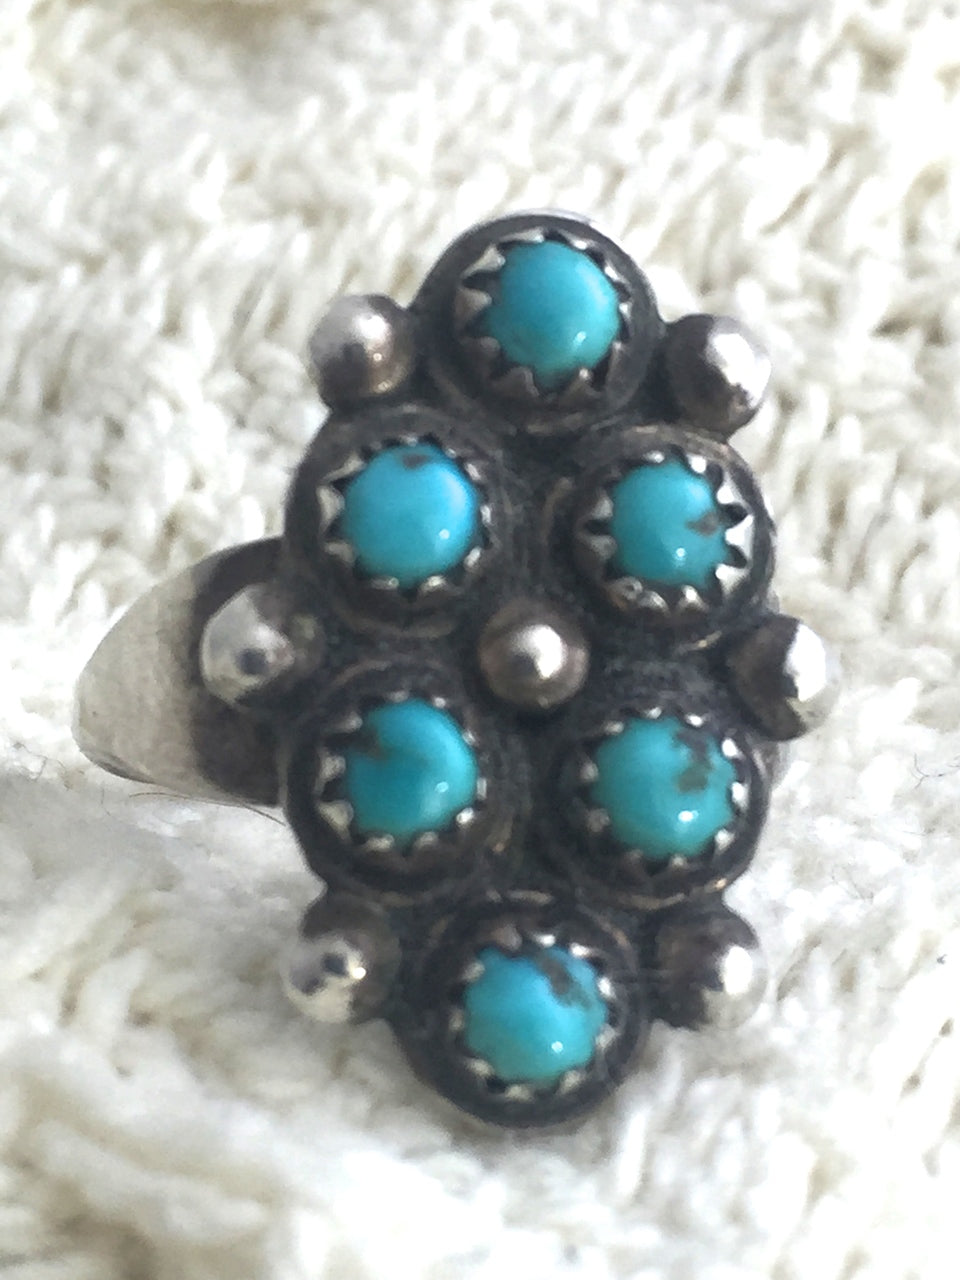 Vintage Sterling Silver Southwestern Tribal Turquoise Ring Petite Pointe  Size 6.5 4.8g